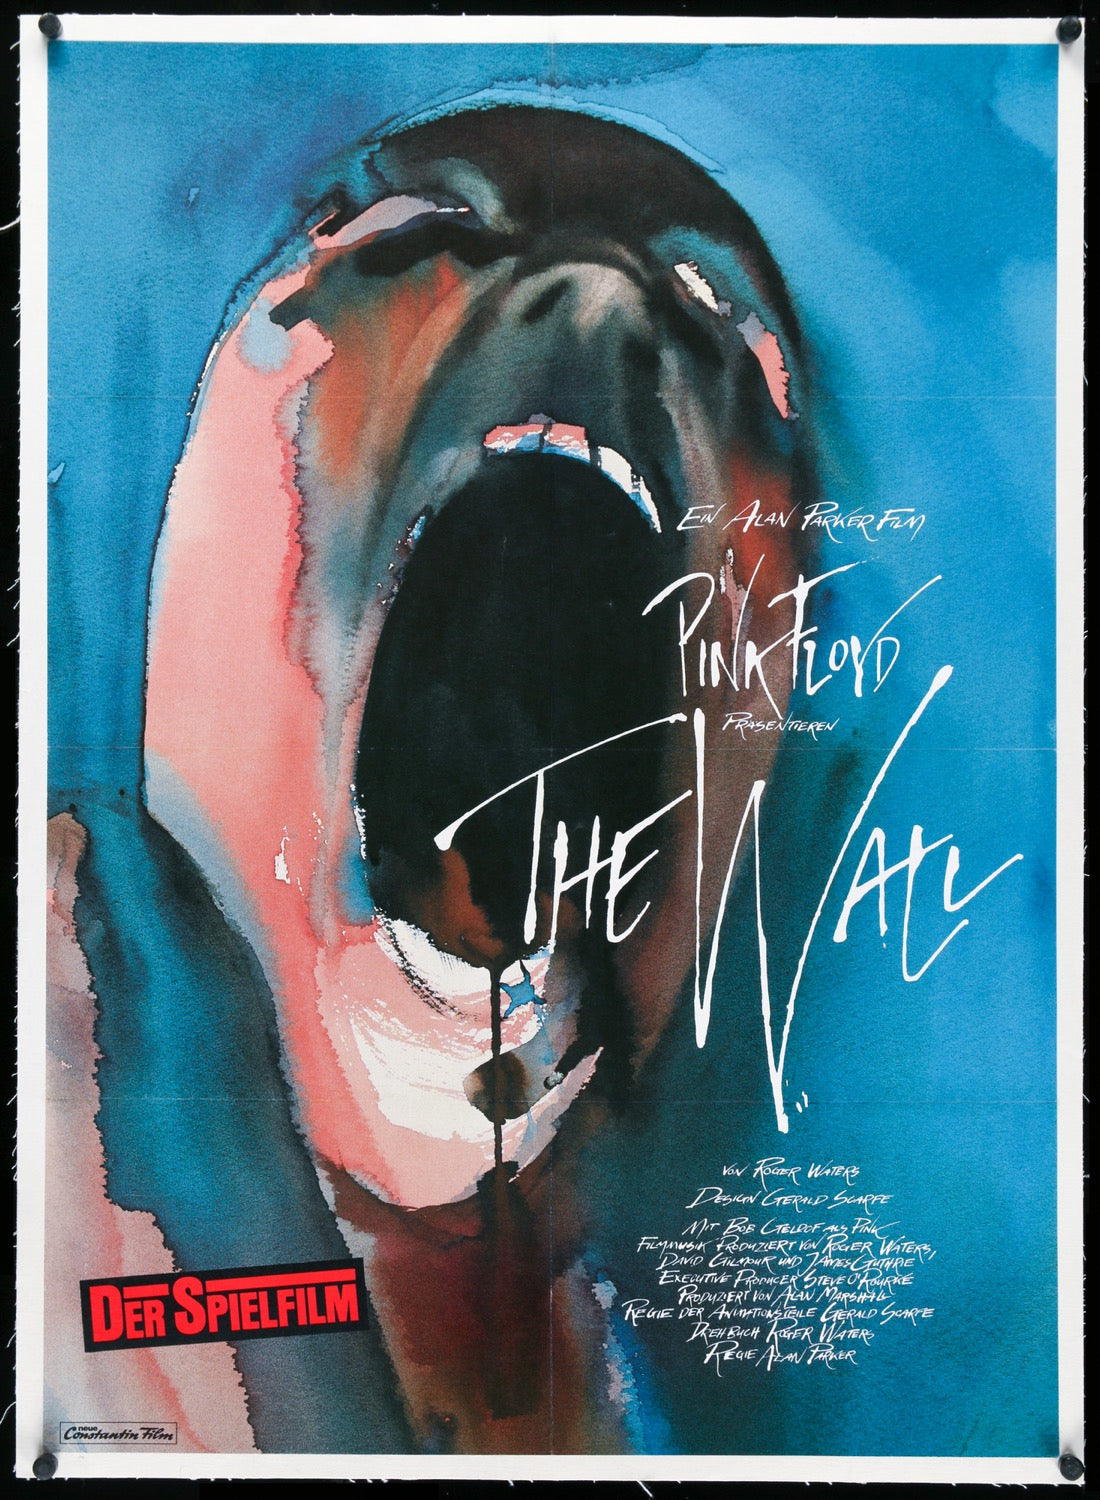 Pink Floyd: The Wall (1982) original movie poster for sale at Original Film Art